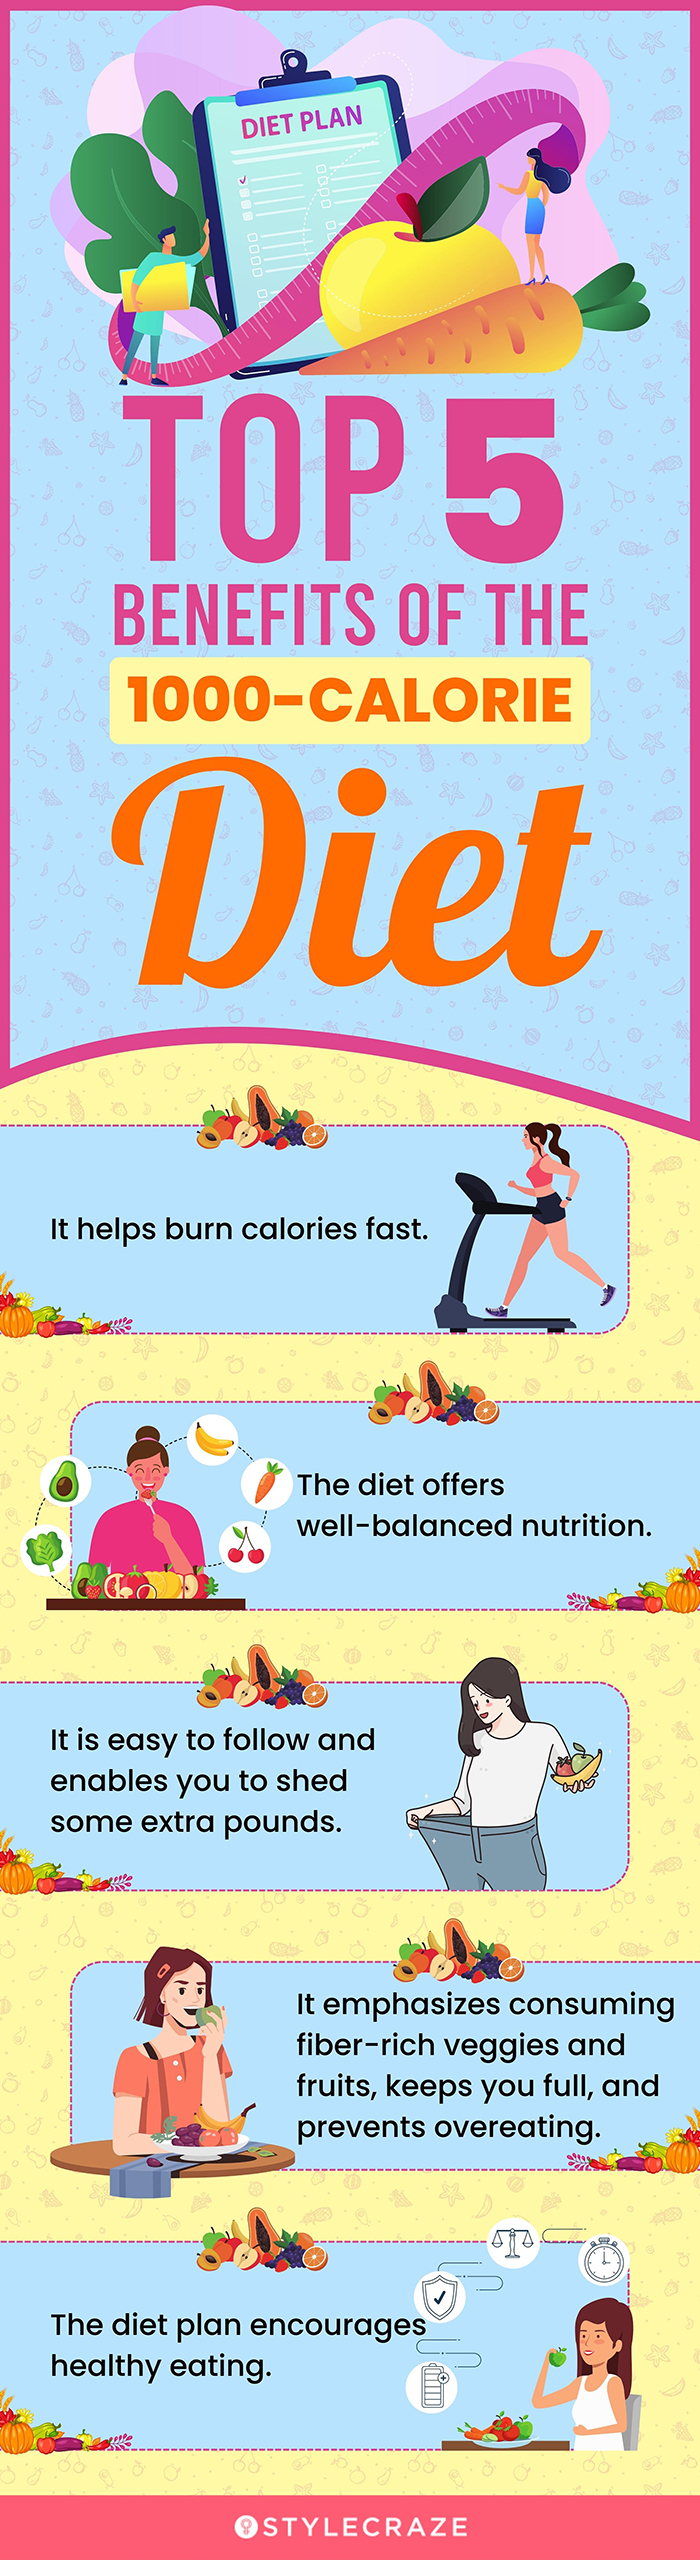 top 5 benefits of the 1000-calorie diet (infographic)